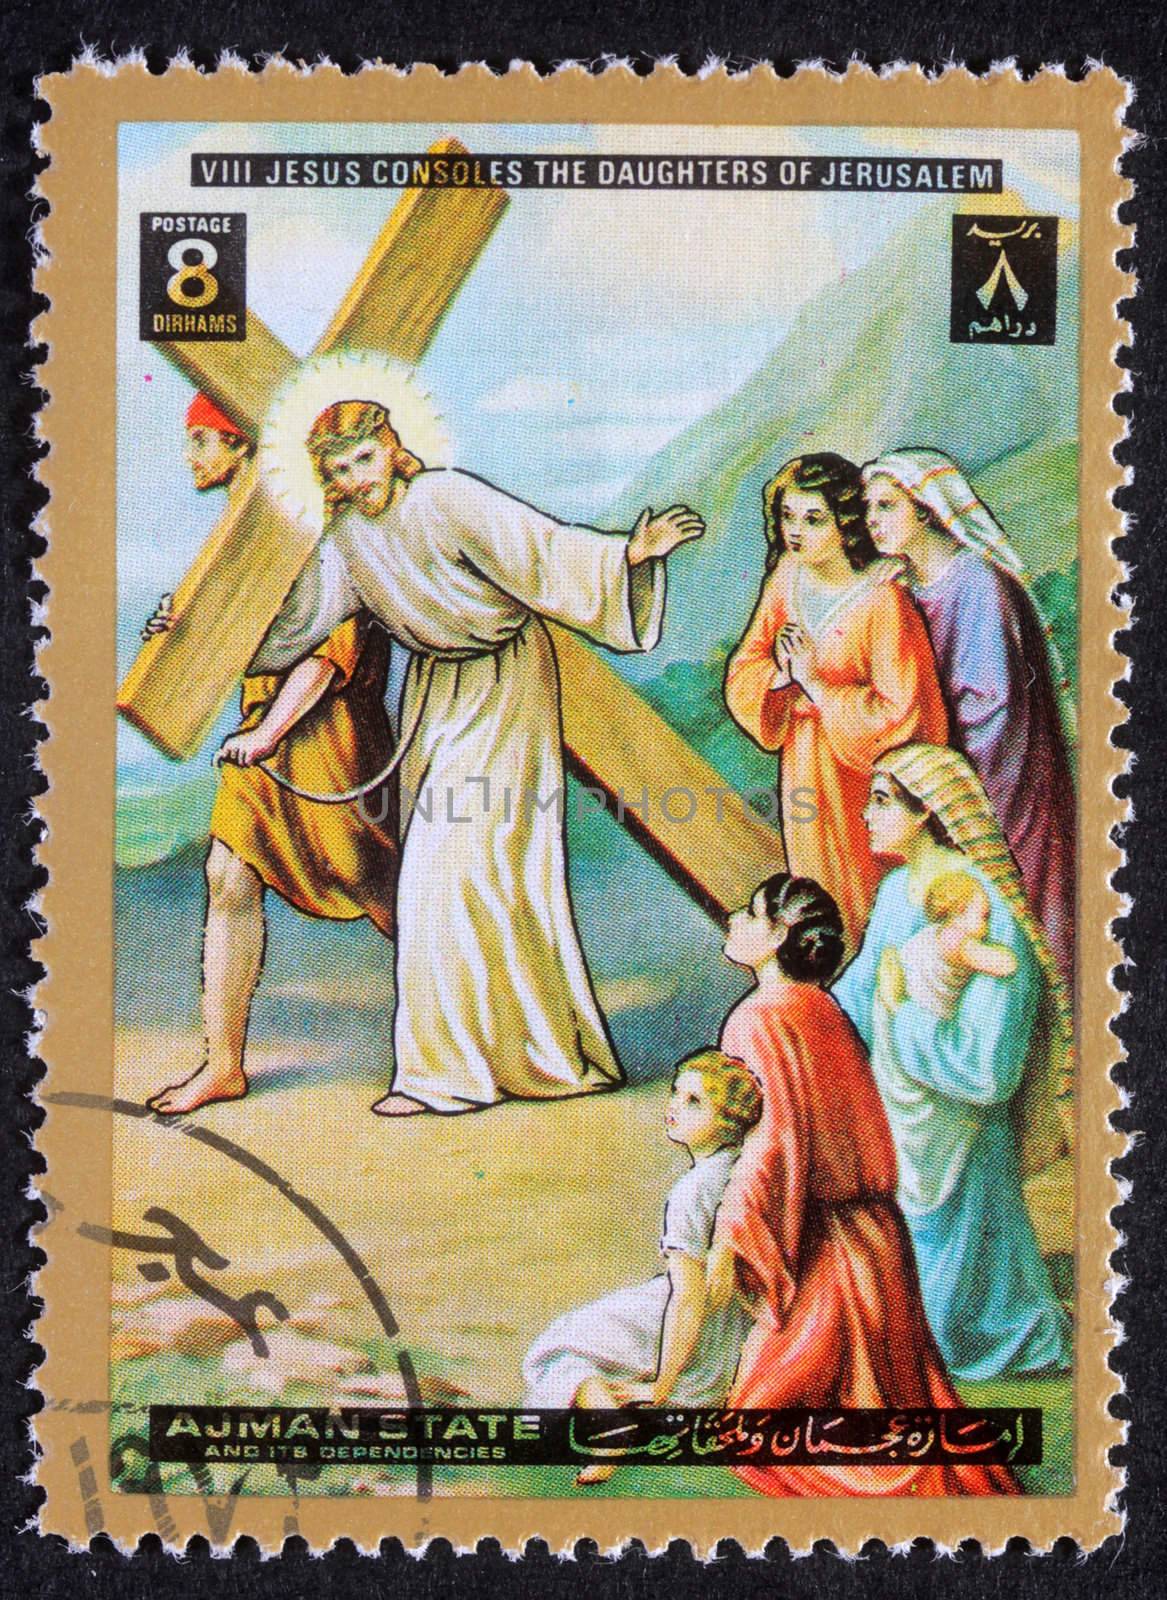 AJMAN - CIRCA 1980: Stamp printed in Ajman shows 8th Stations of the Cross